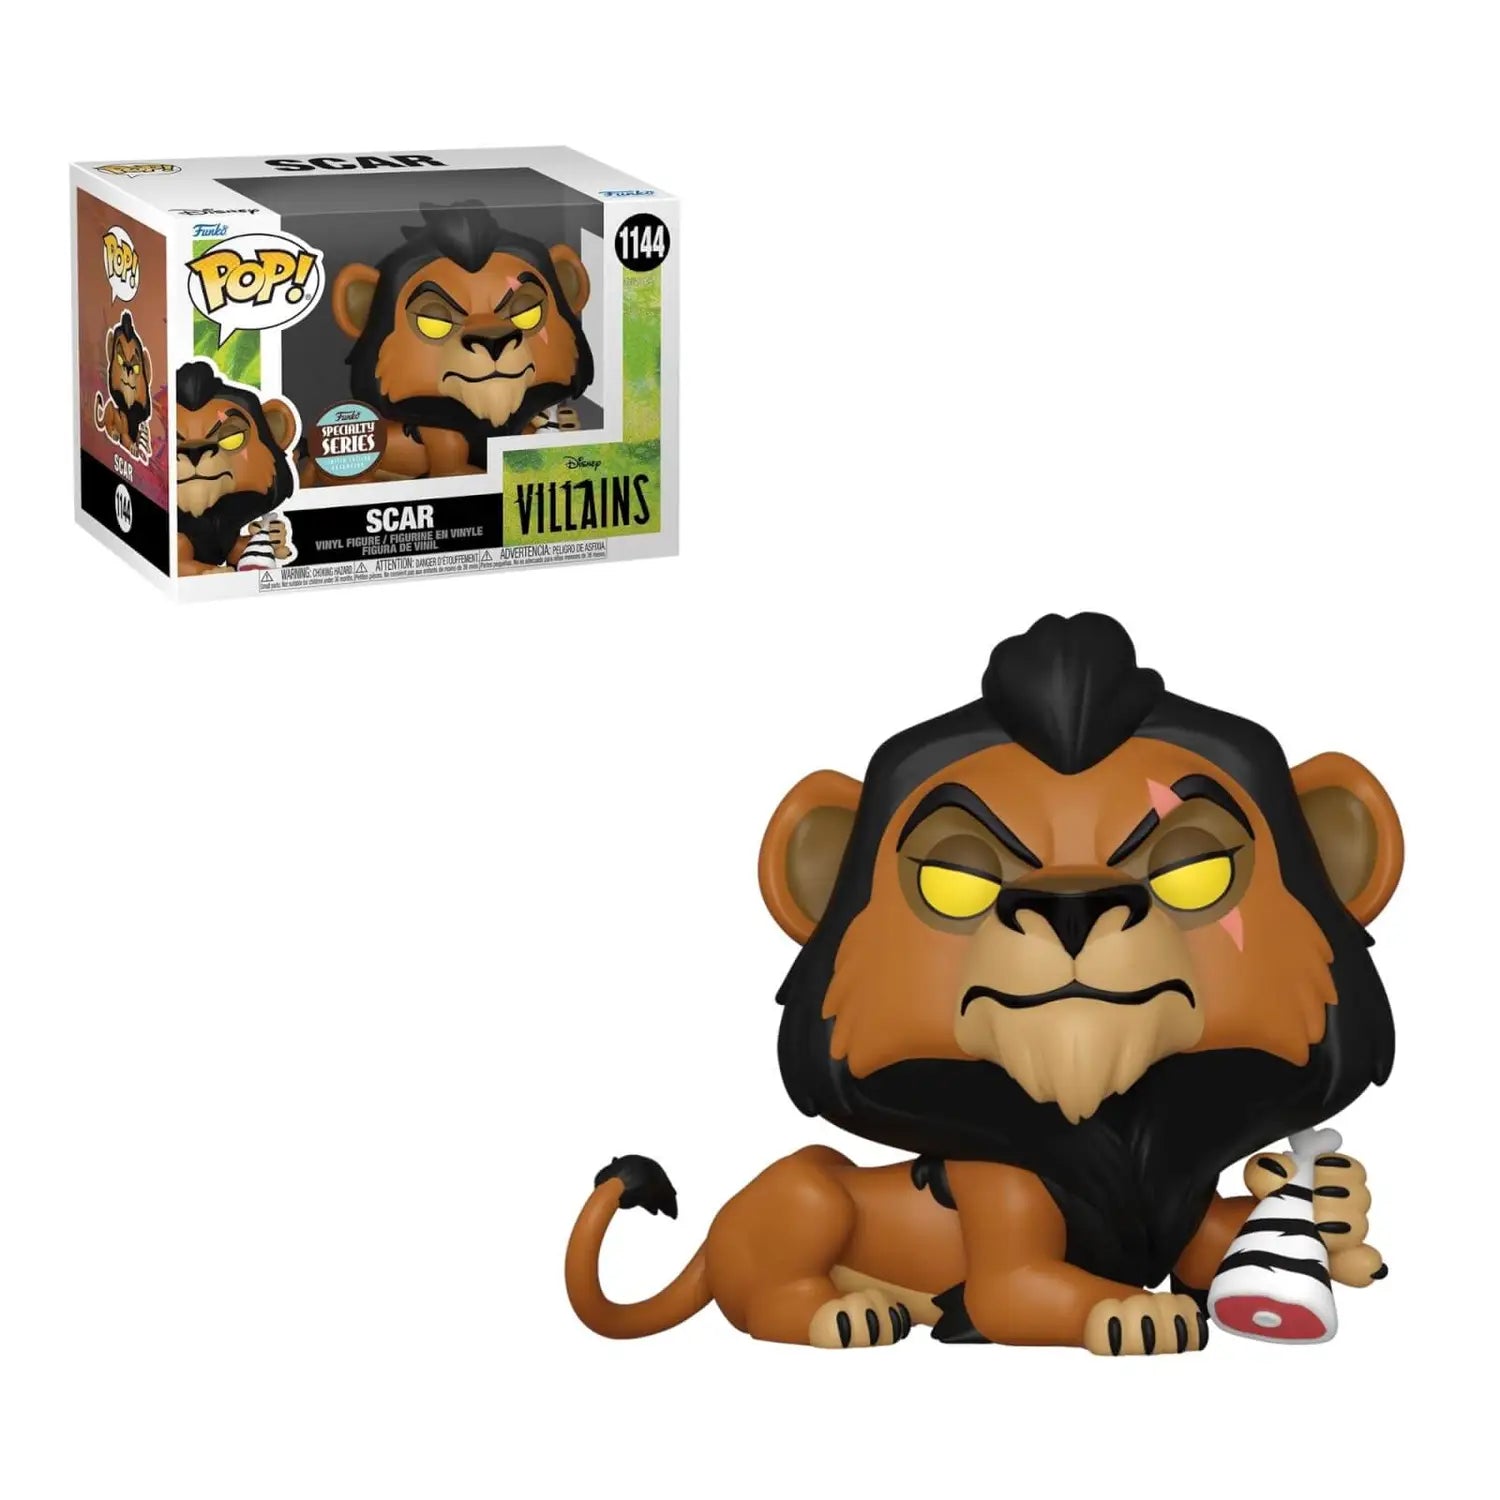 Funko Pop! Disney The Lion King Scar with Meat - BumbleToys - 18+, Action Figures, Boys, Characters, Funko, Girls, Lion King